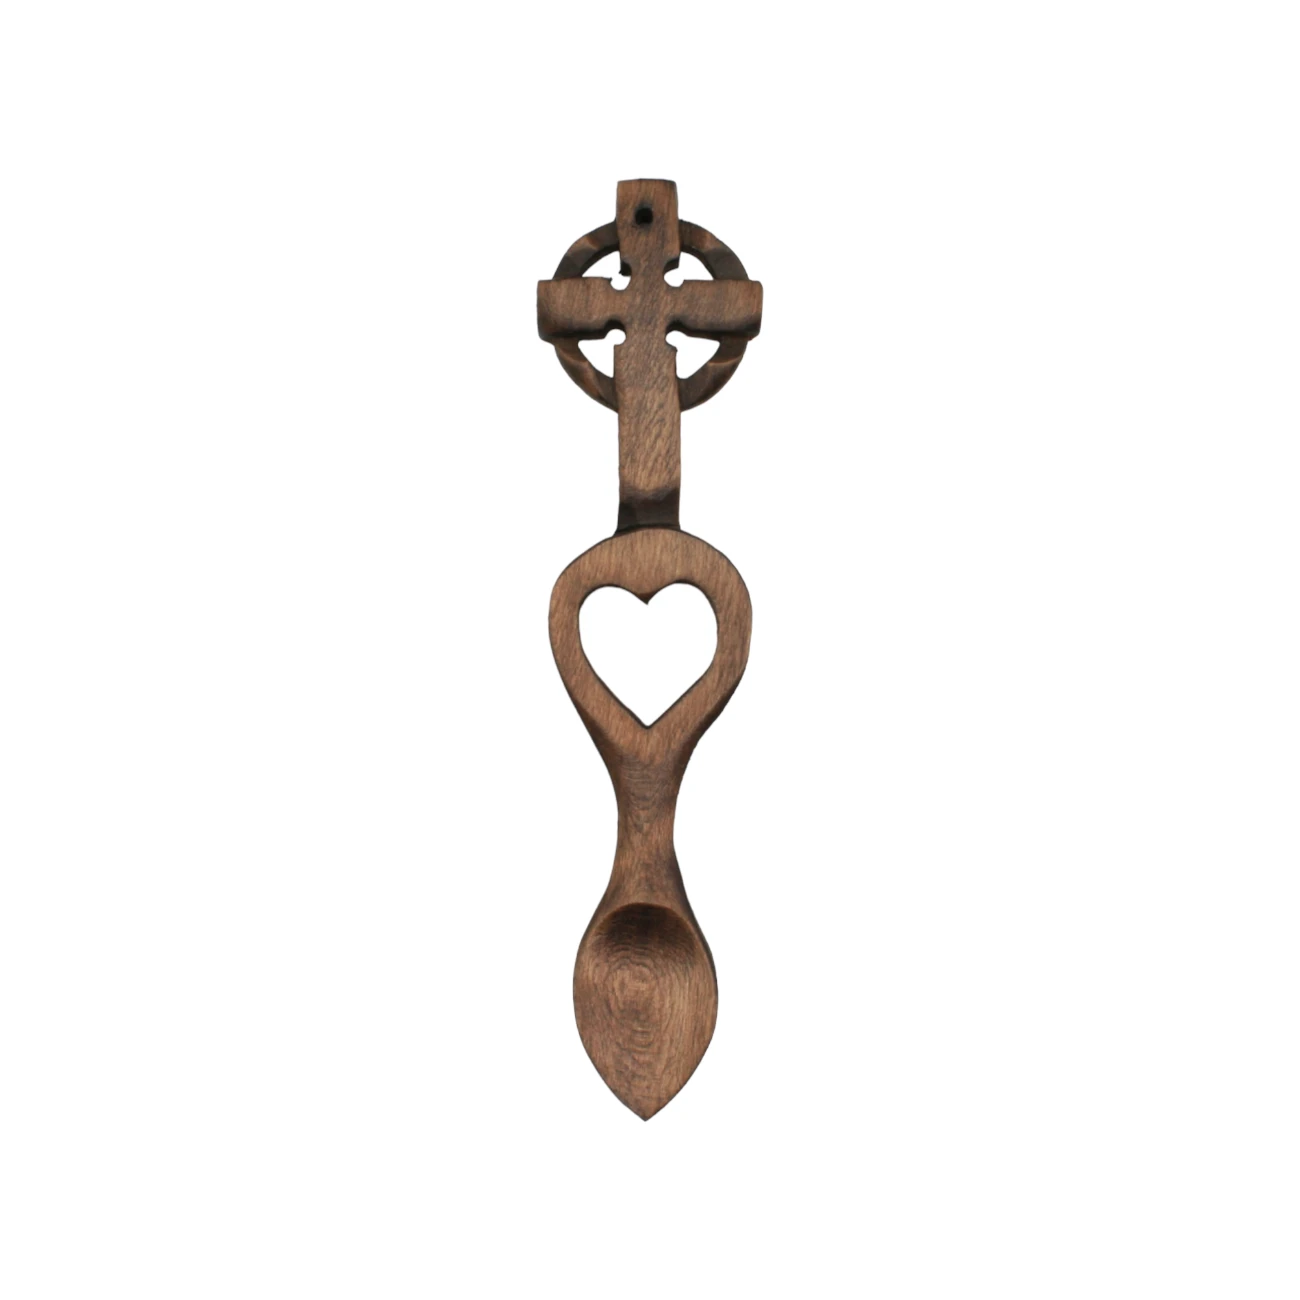 An image of a lovespoon titled Cross & Cut out Heart